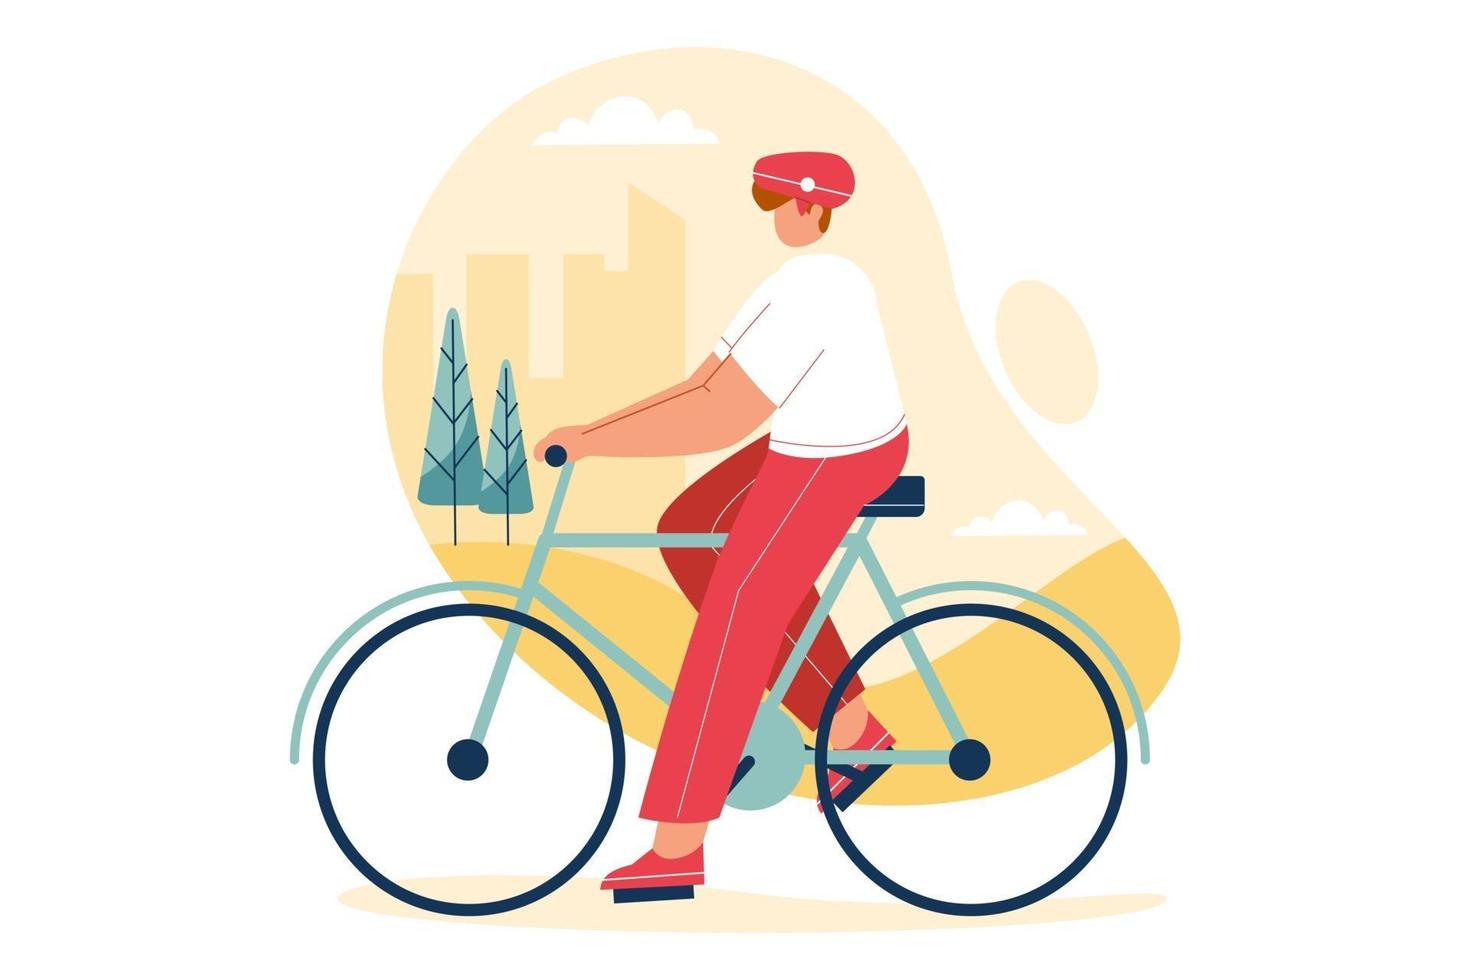 Person exercises on bike at city park. Healthy lifestyle vector illustration concept.